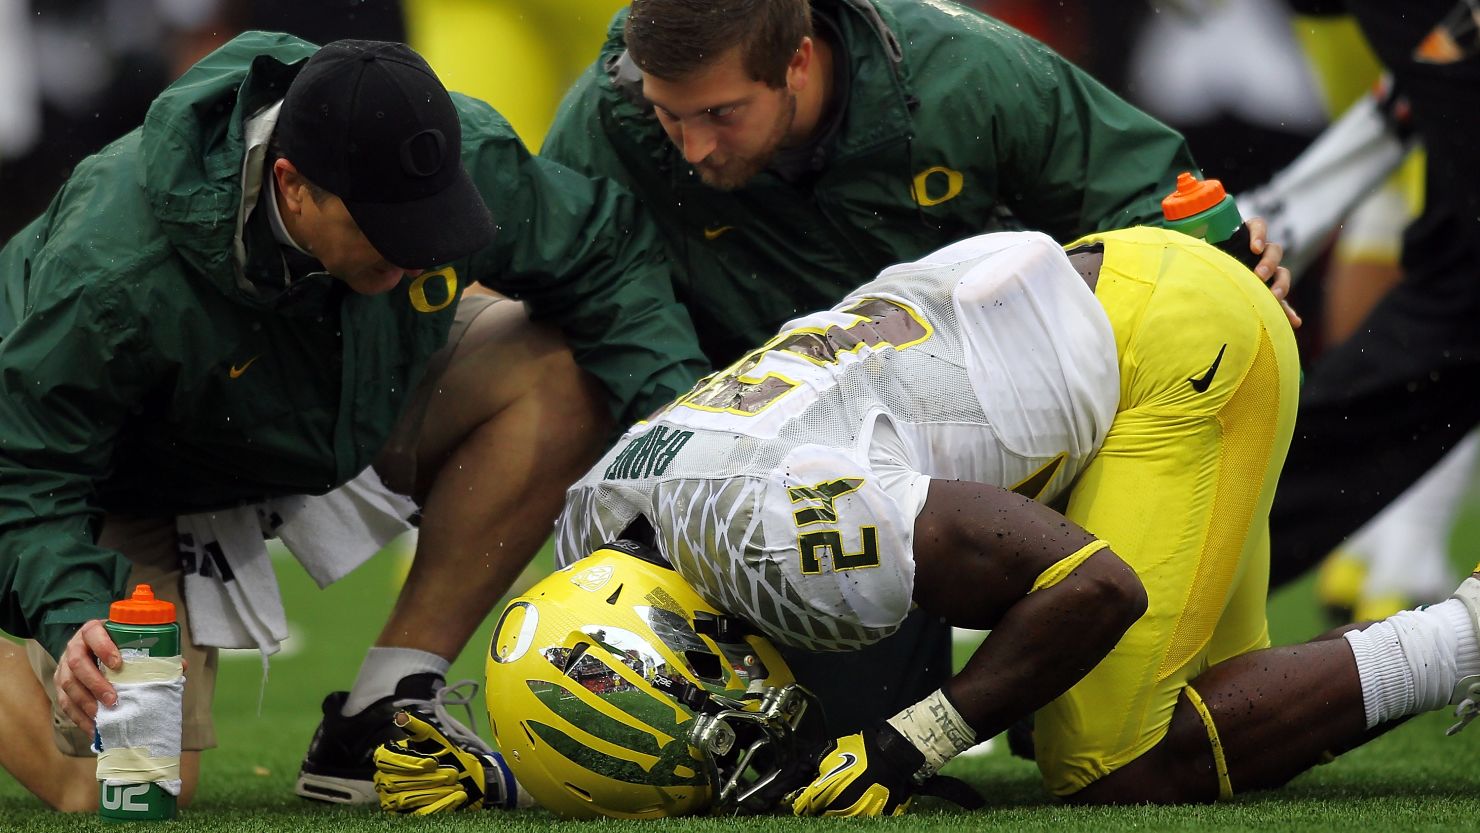 Trainers attend to a University of Oregon player hurt in a football game in Corvallis, Oregon, on November 24, 2012.